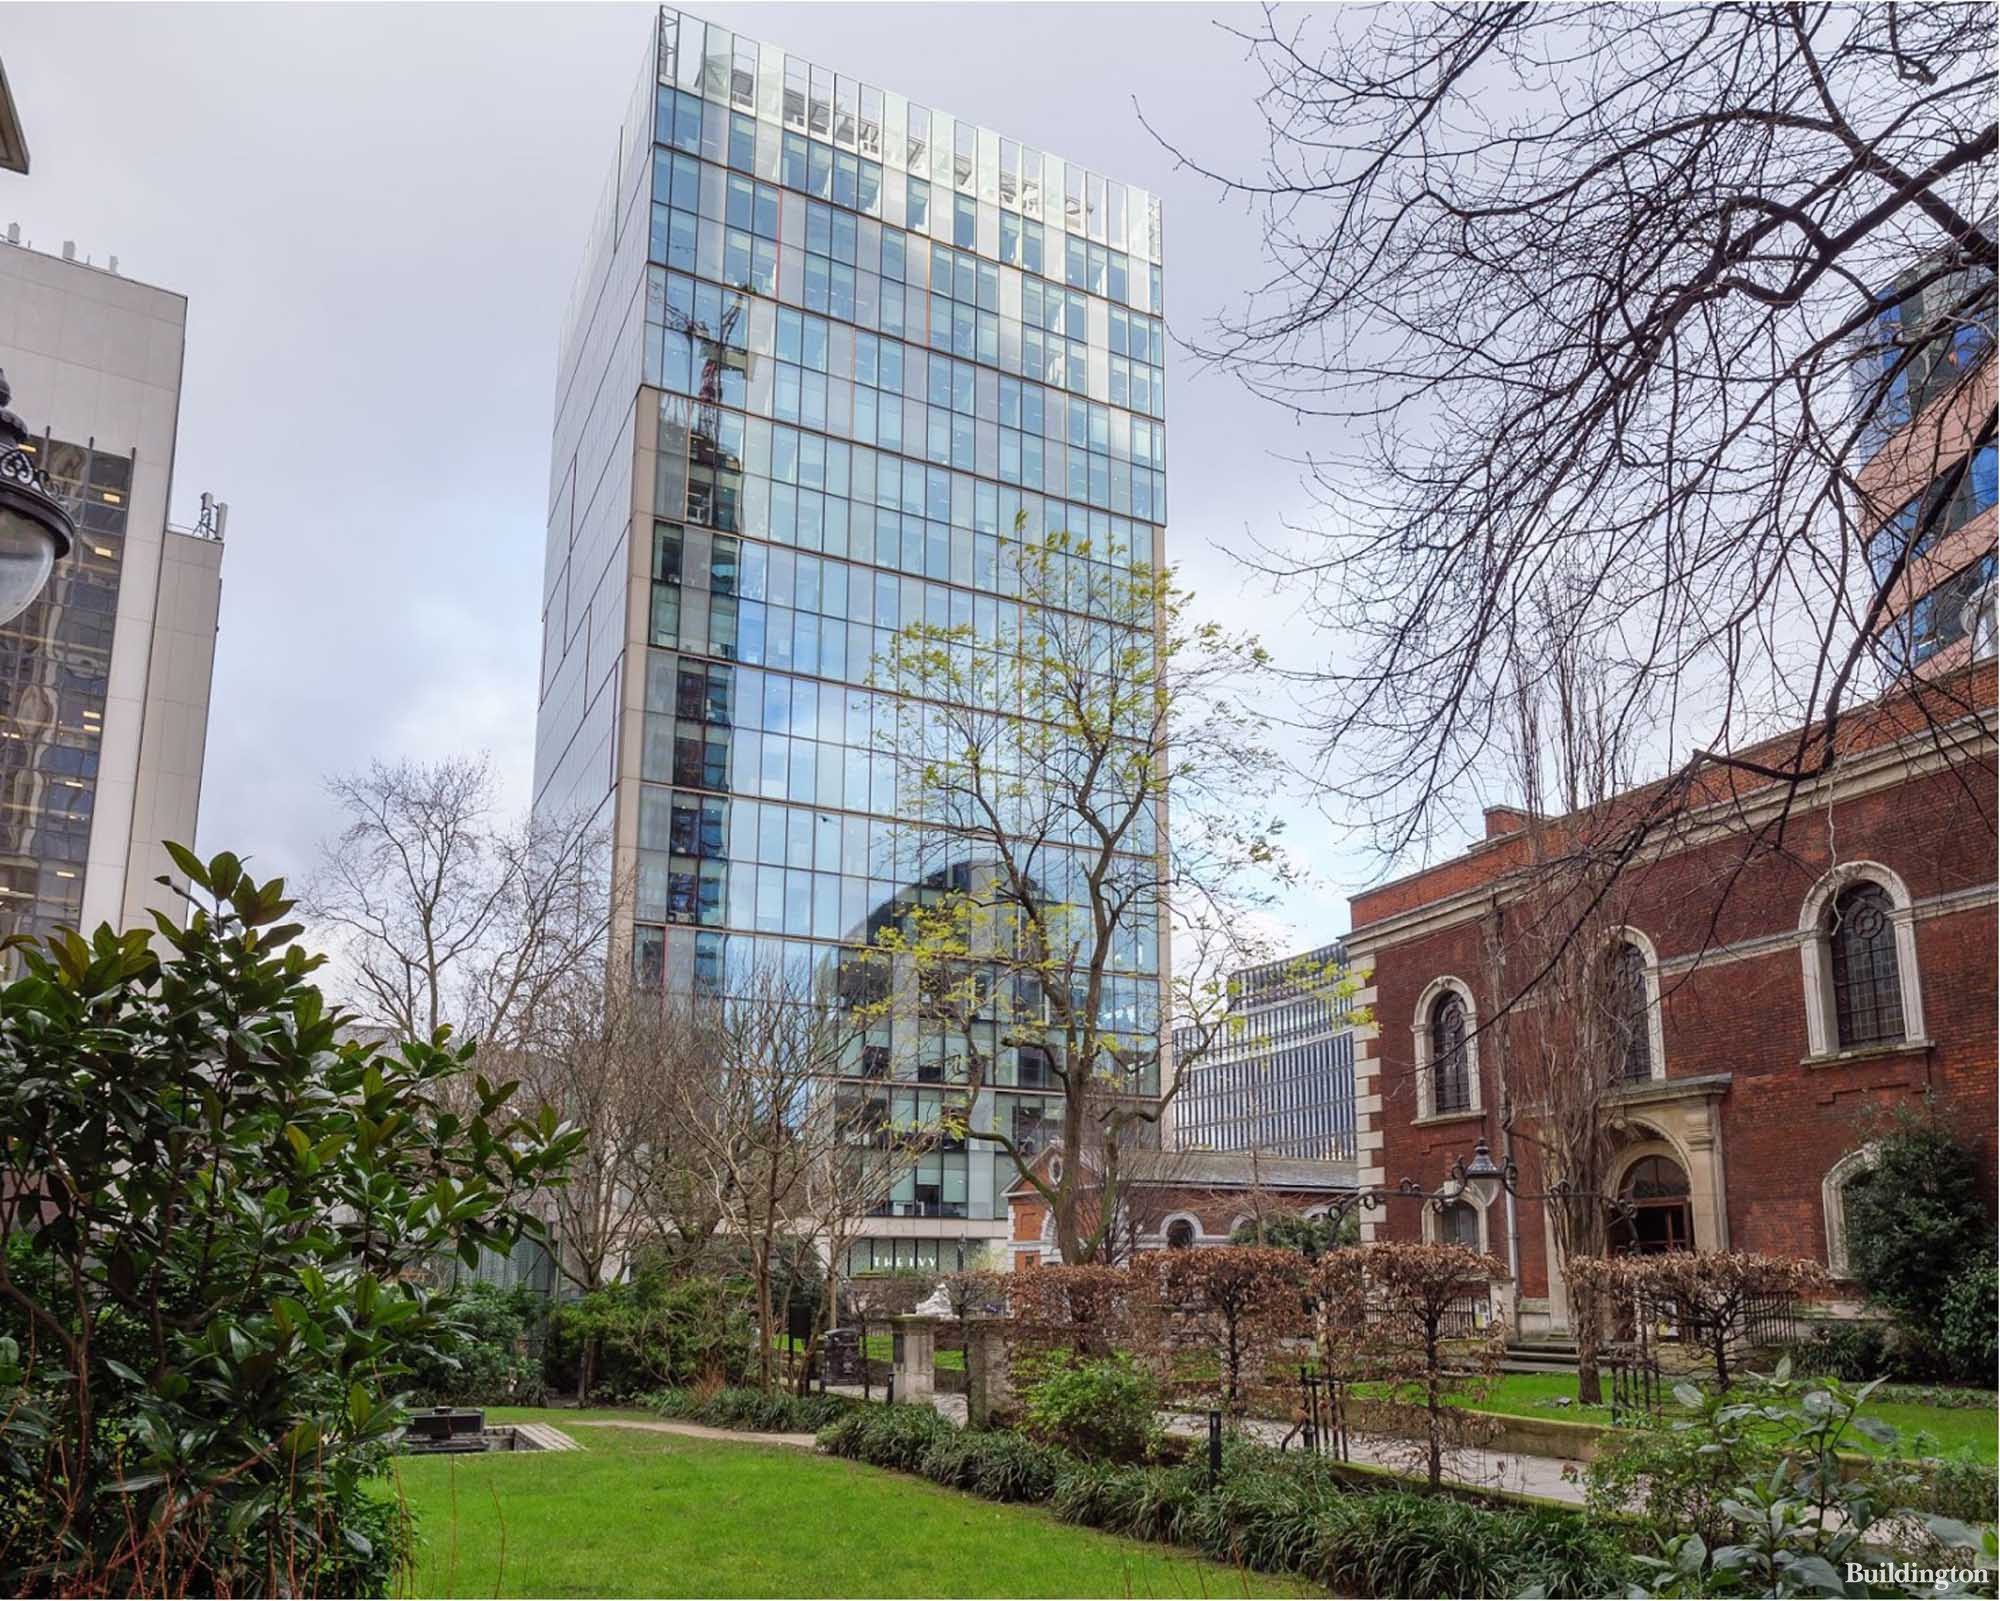 The 17-storey Dashwood House office building in the City of London EC2 is just moments from Liverpool Street Station. St. Botolph Bishopsgate to the right.